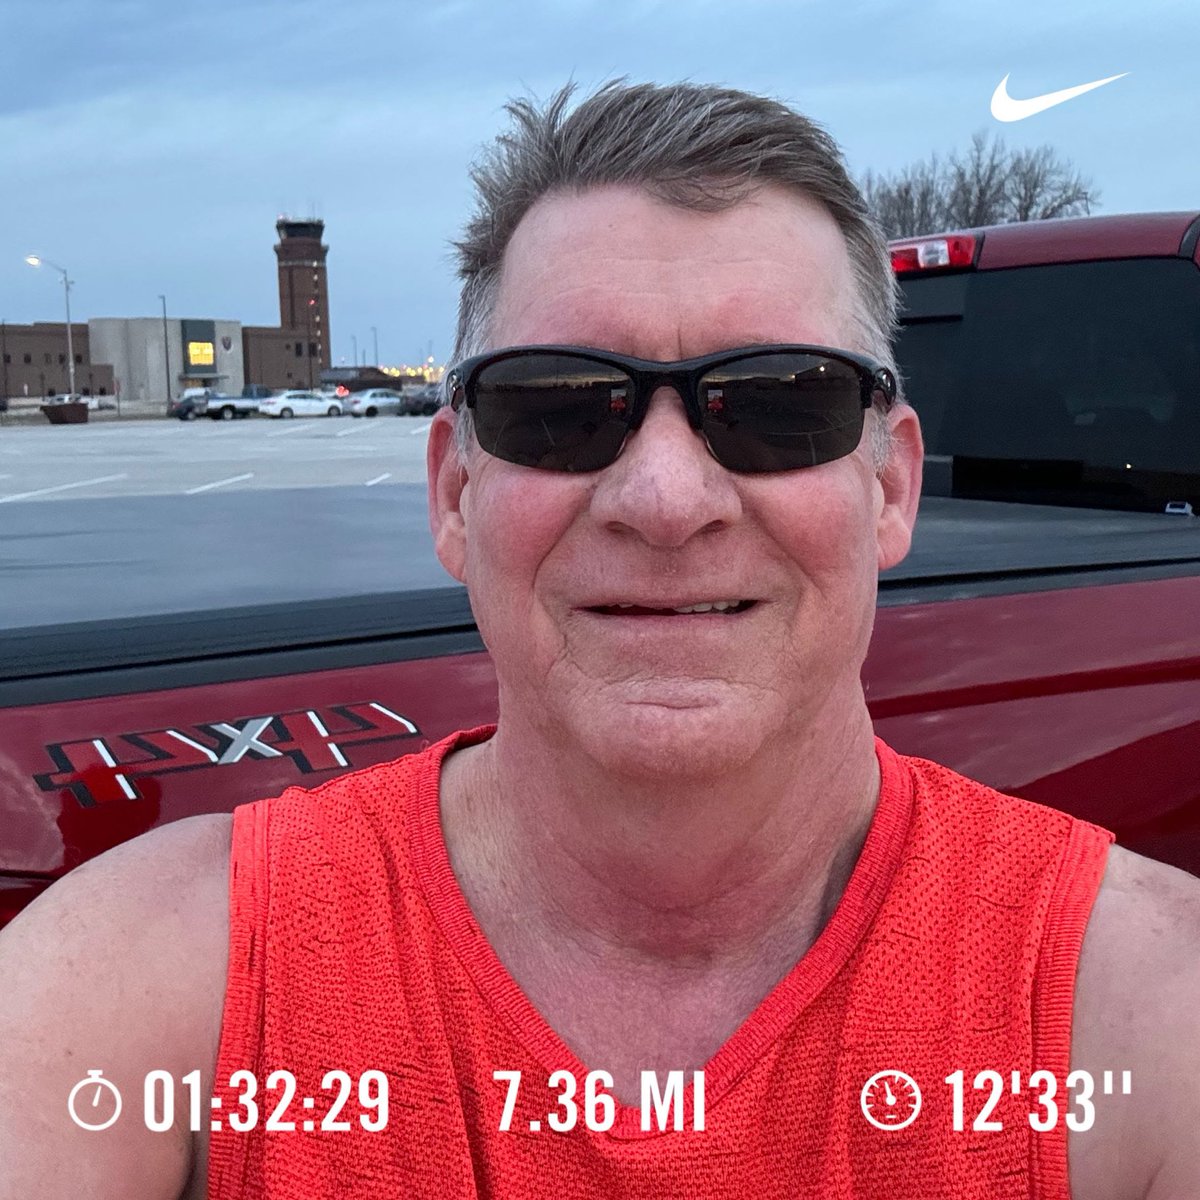 Not bad, good to get a midweek run in, unbelievable weather.. 70’s in February! Also this serves to loosen up for the Half on Saturday.
#cantstopwontstoprunning
#pushingtheclockback
#foryoumom
#foryoudad